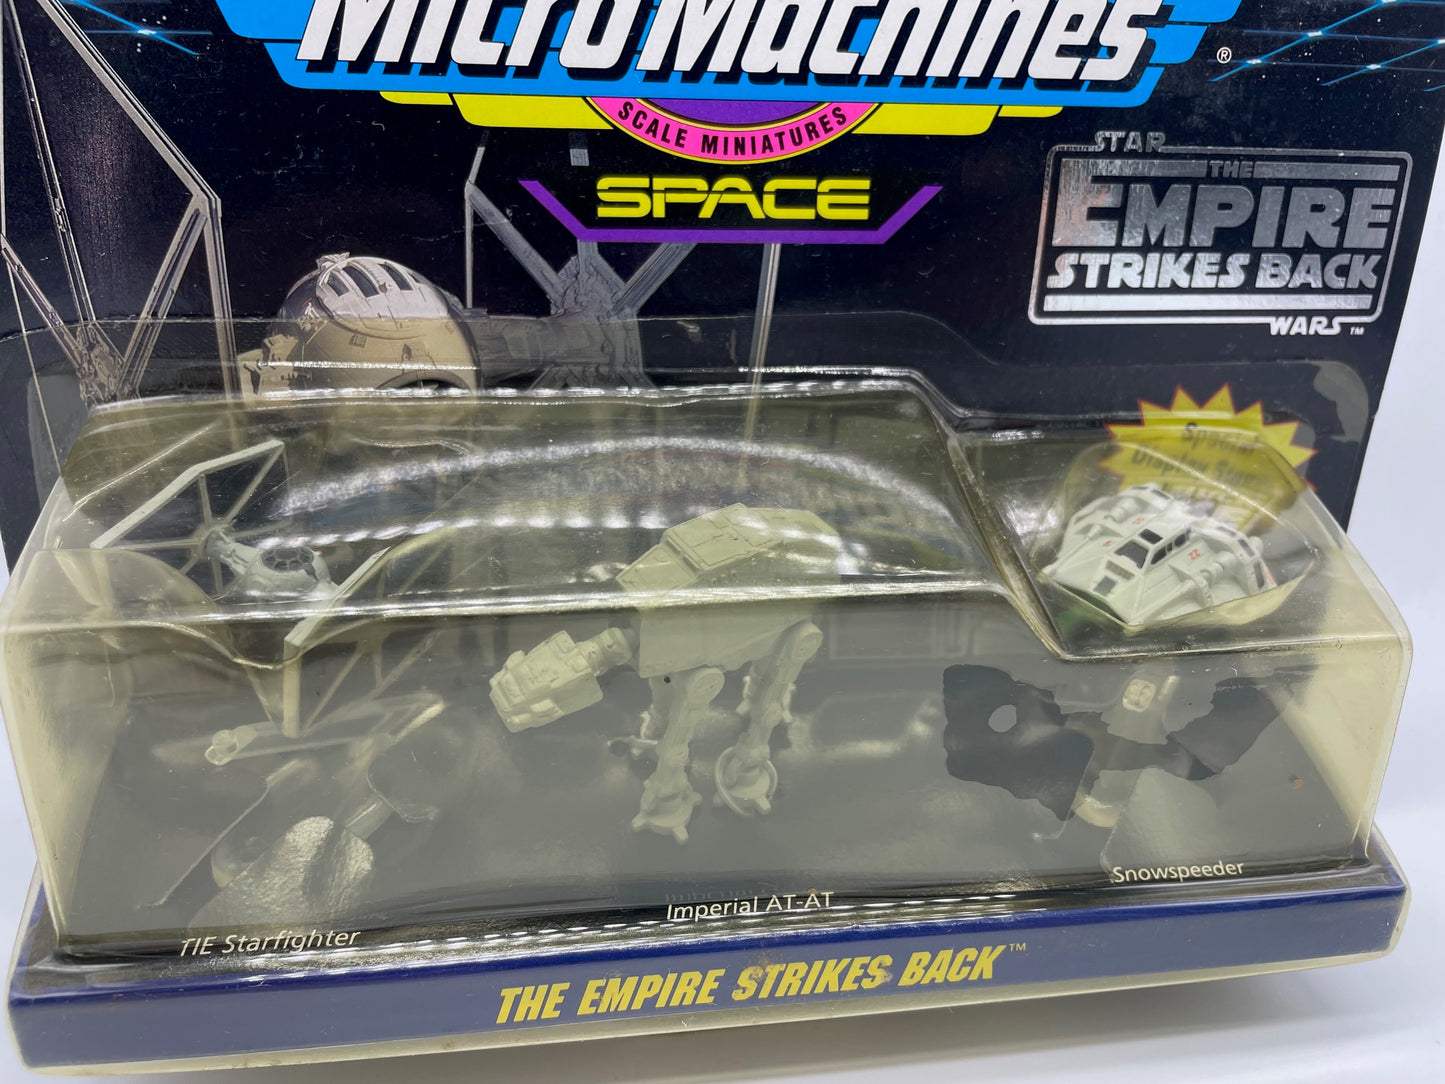 Micro Machines Ships Collection IV ESB #2, Galoob Vintage Sealed